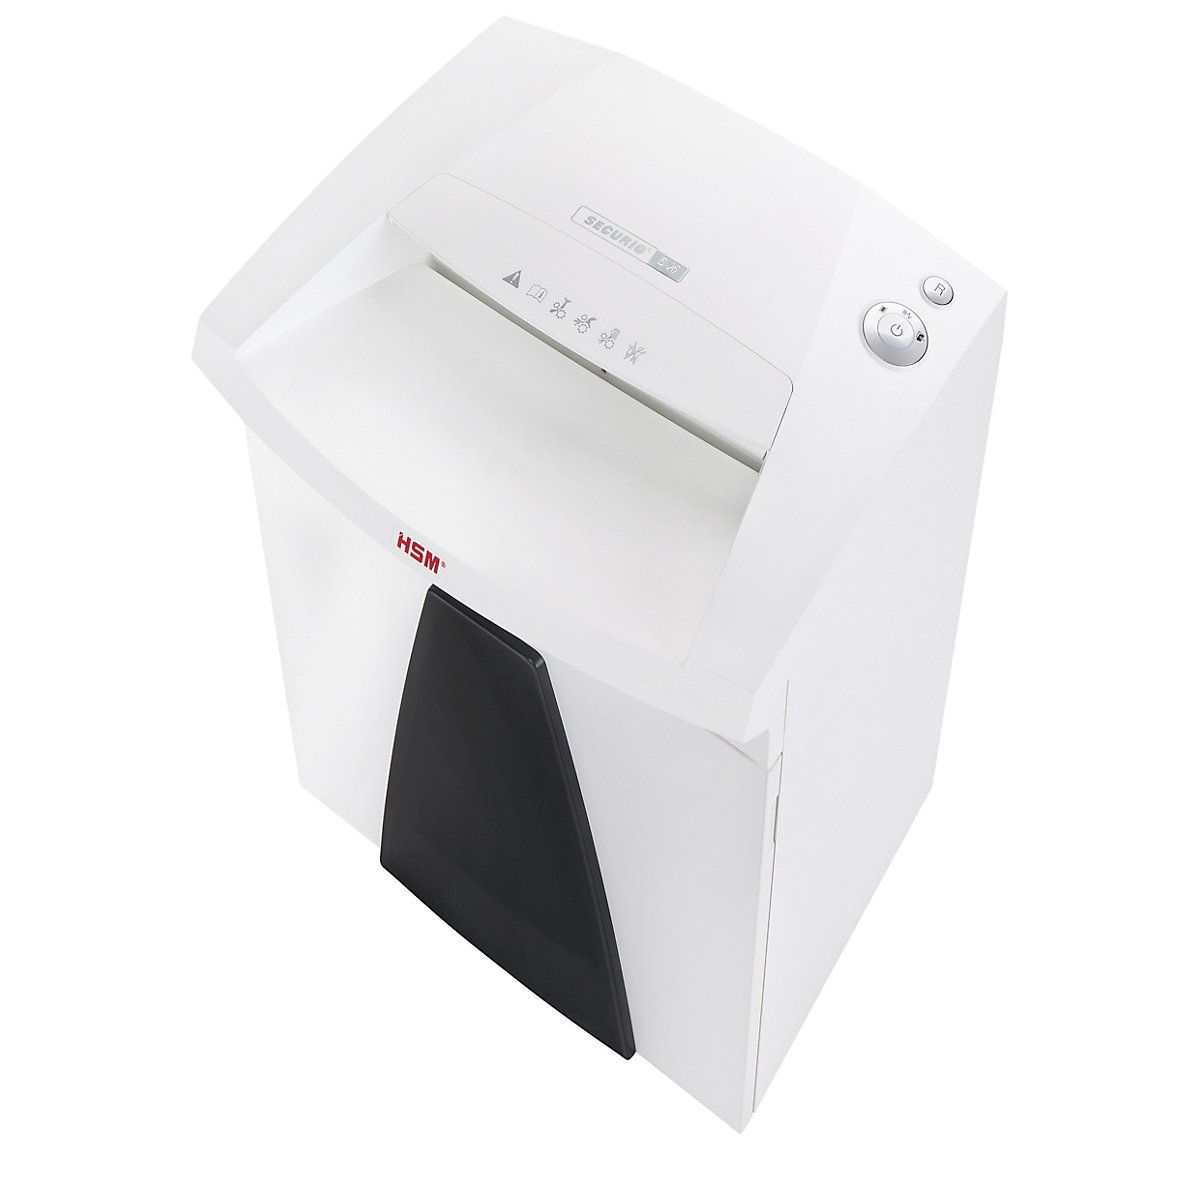 SECURIO document shredder B26 – HSM, collection capacity 55 l, particles, 4 sheets-6